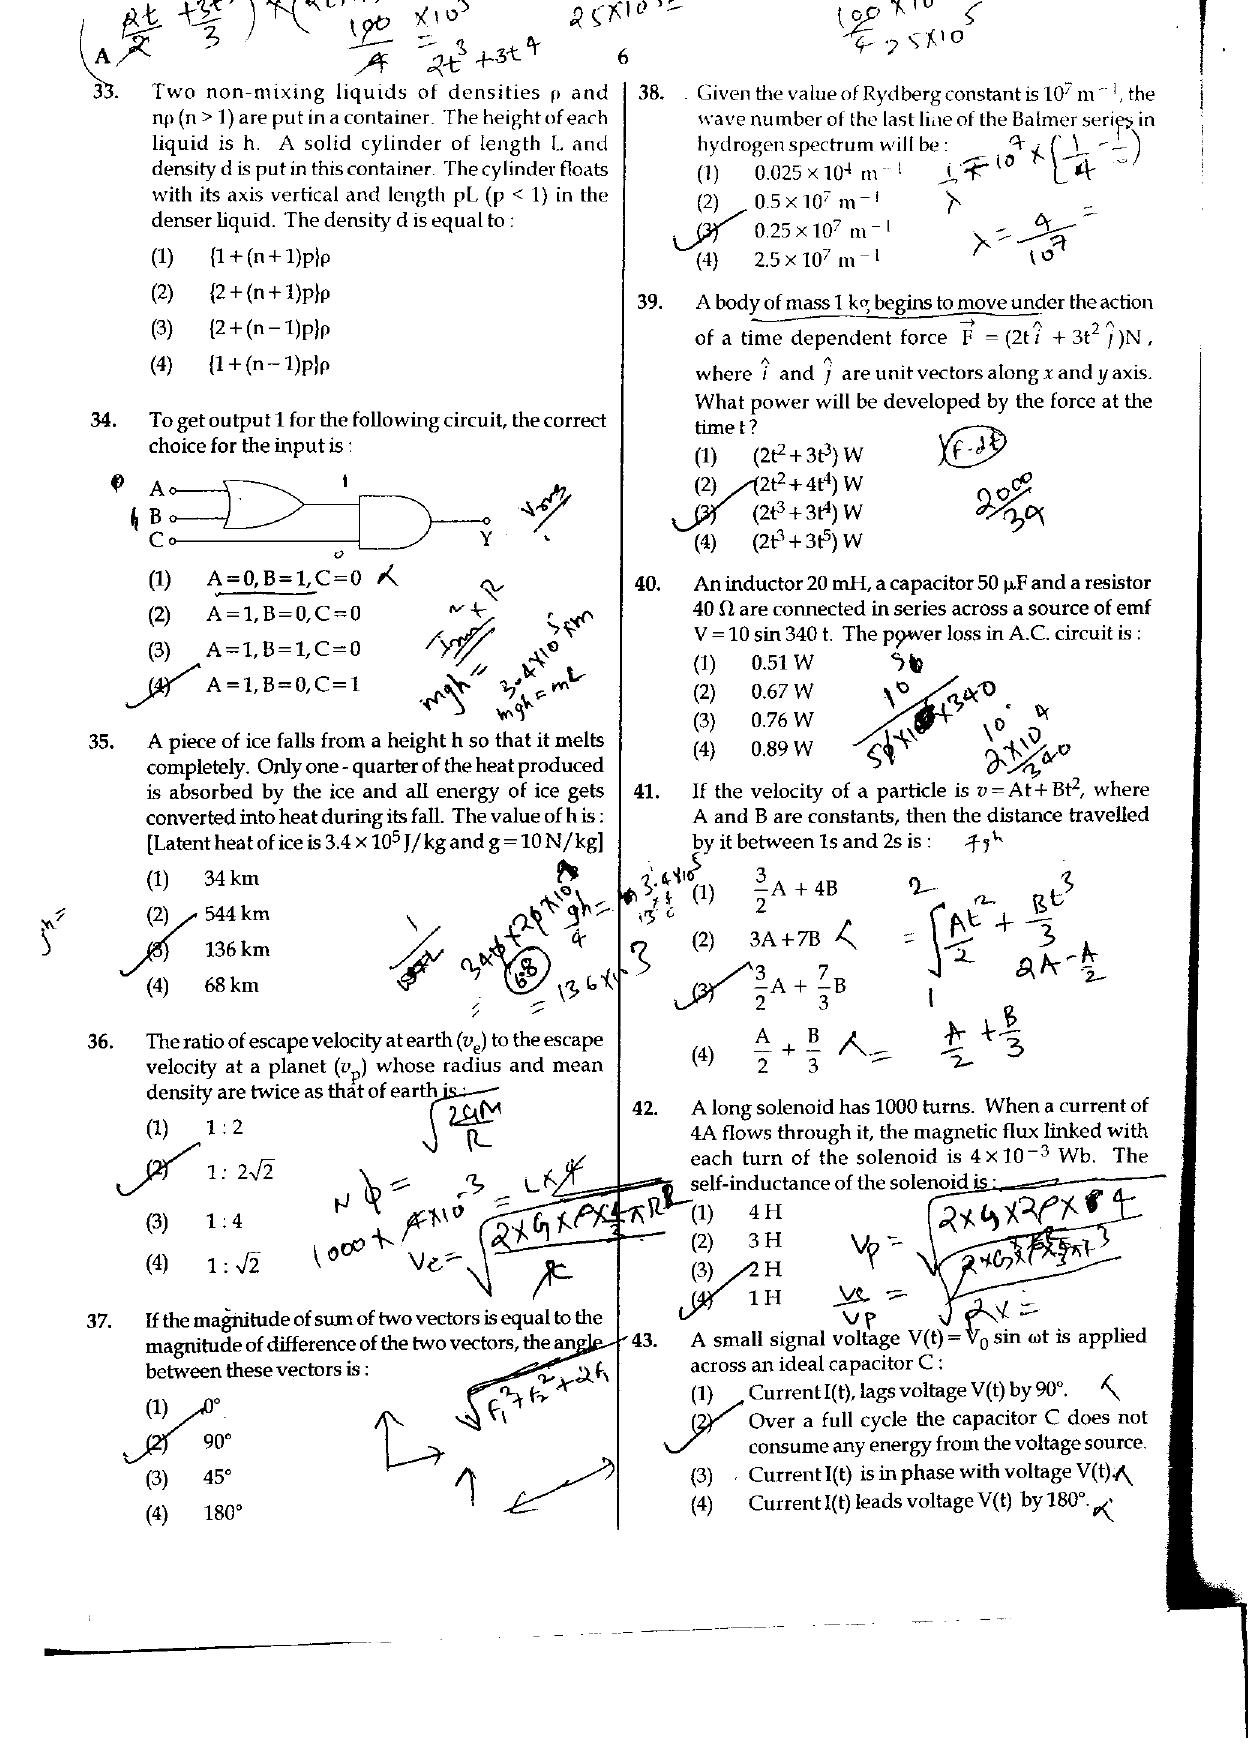 NEET Code A/ P/ W 2016 Question Paper - Page 6